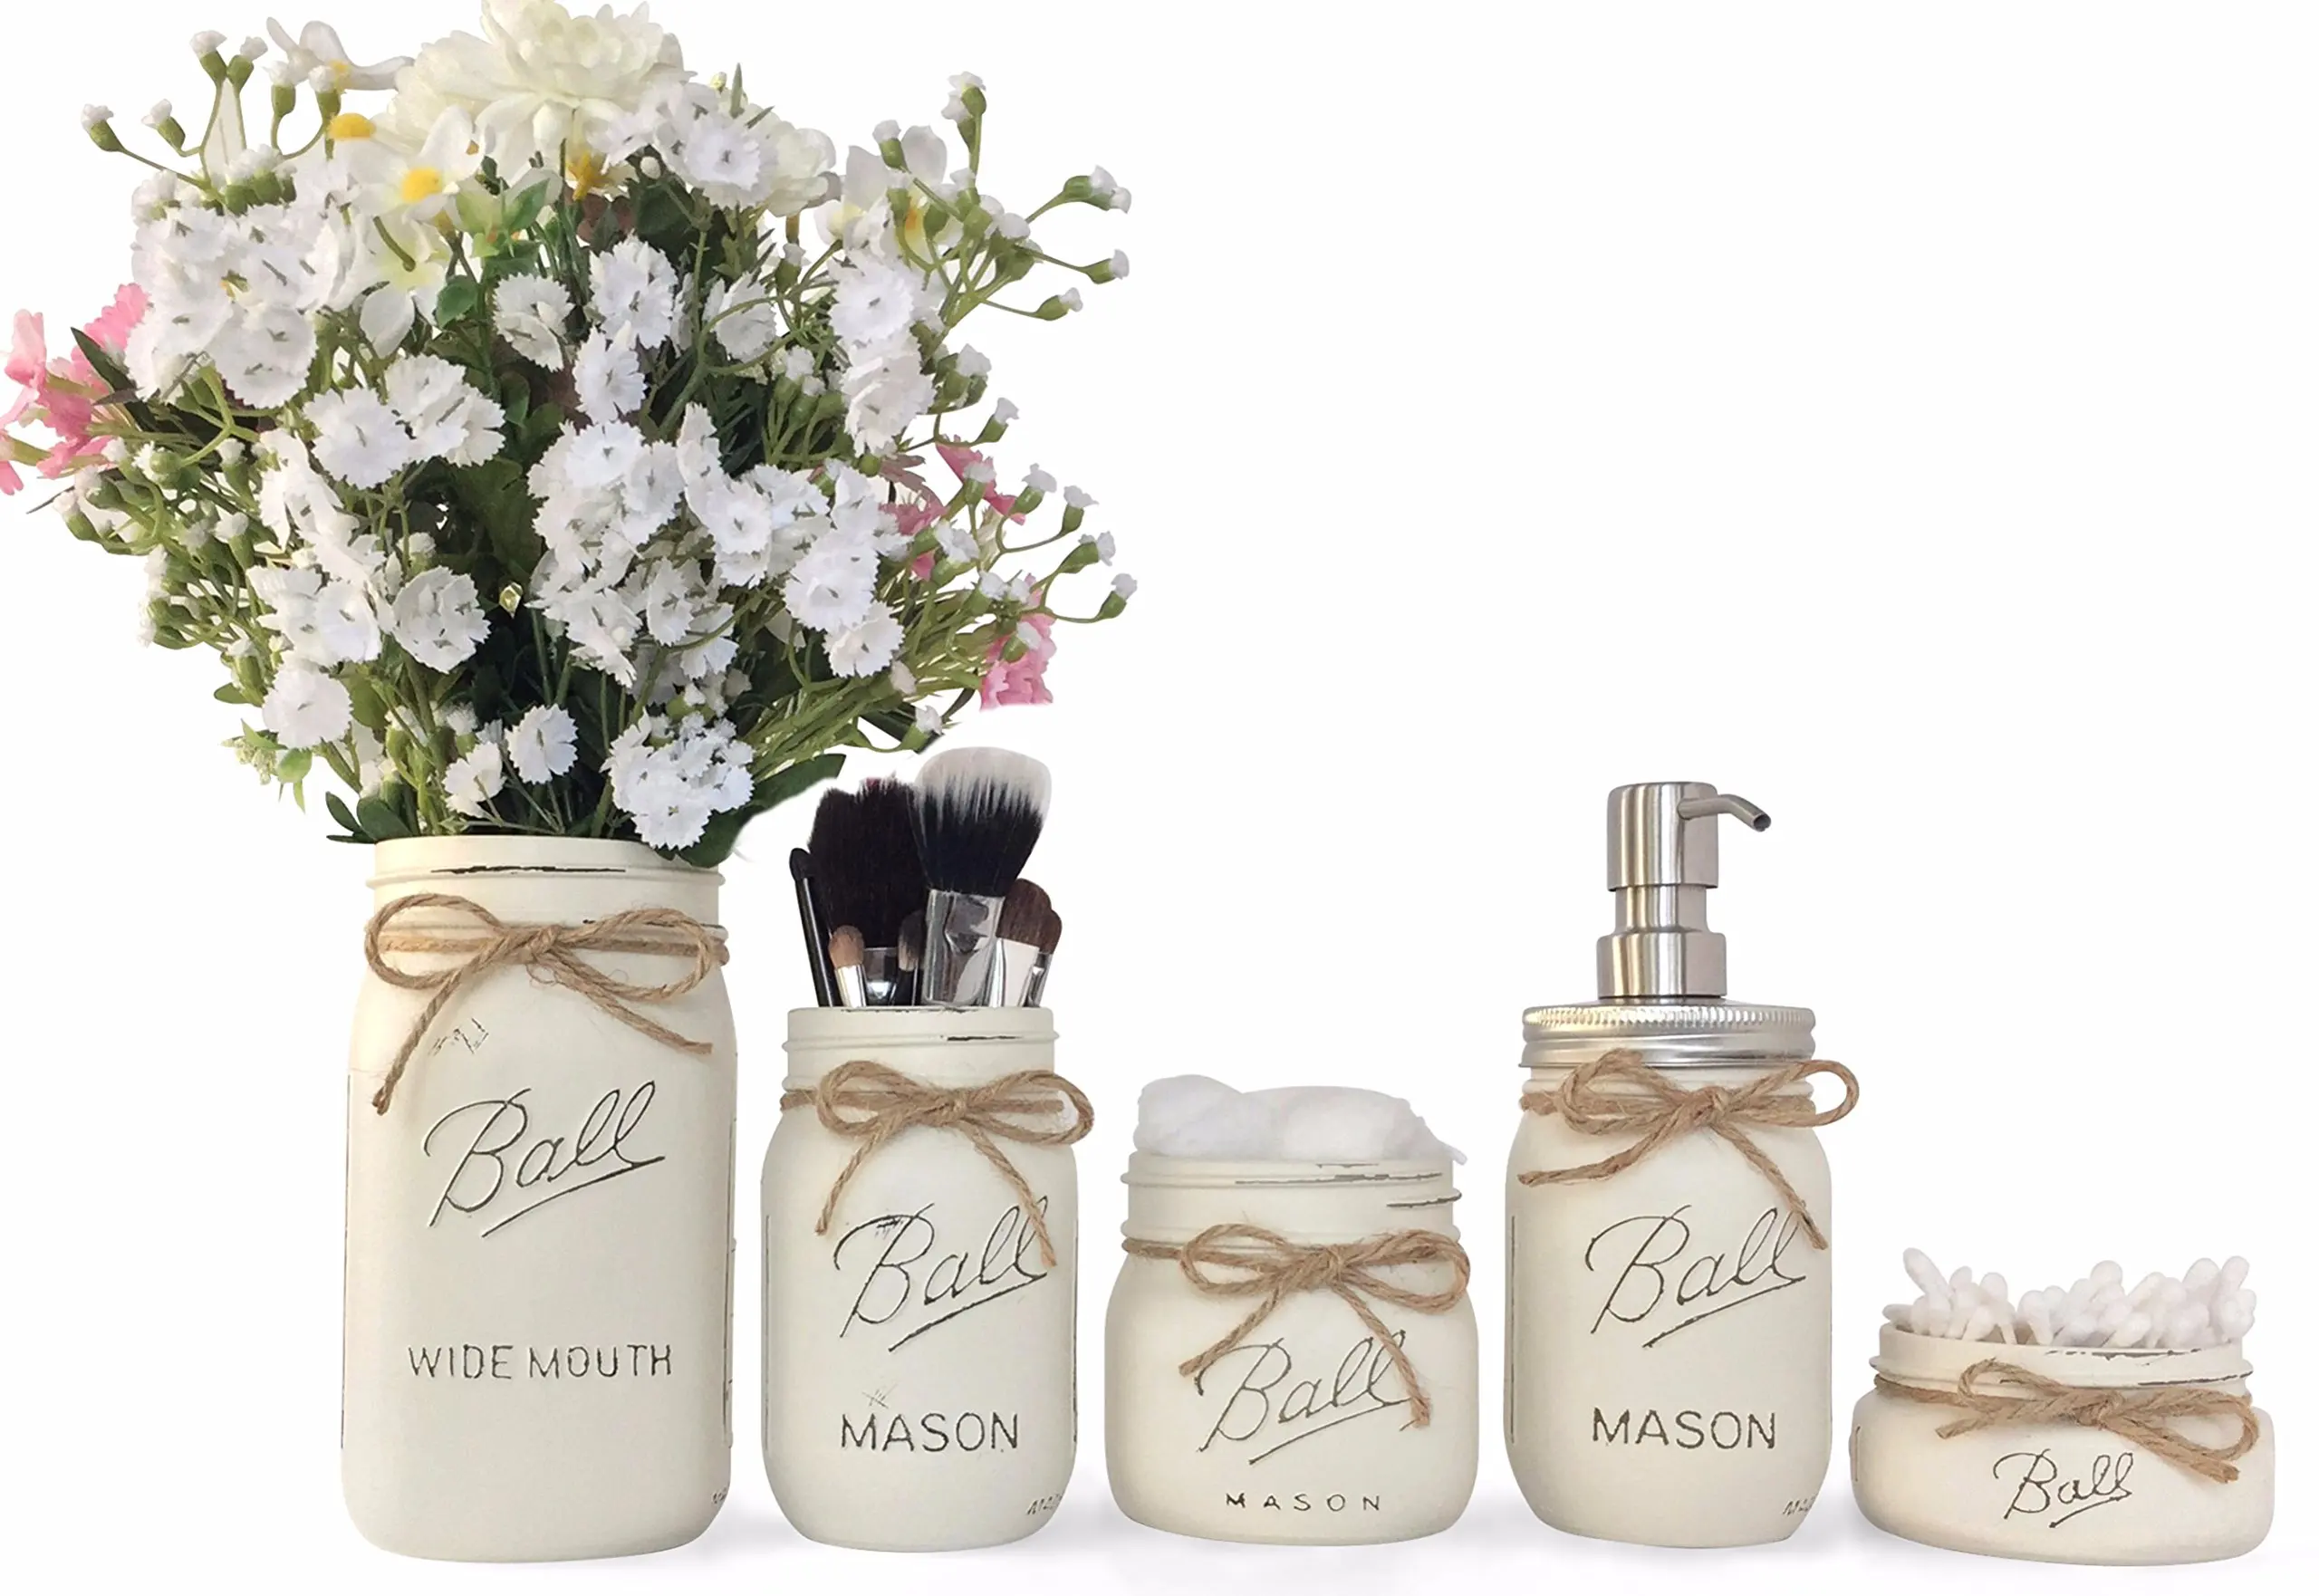 Buy Farmhouse Bathroom Decor Rustic Mason Jar Bathroom Set Country Bathroom Decor Country Creme In Cheap Price On Alibaba Com,How Much Does It Cost To Paint A House Interior